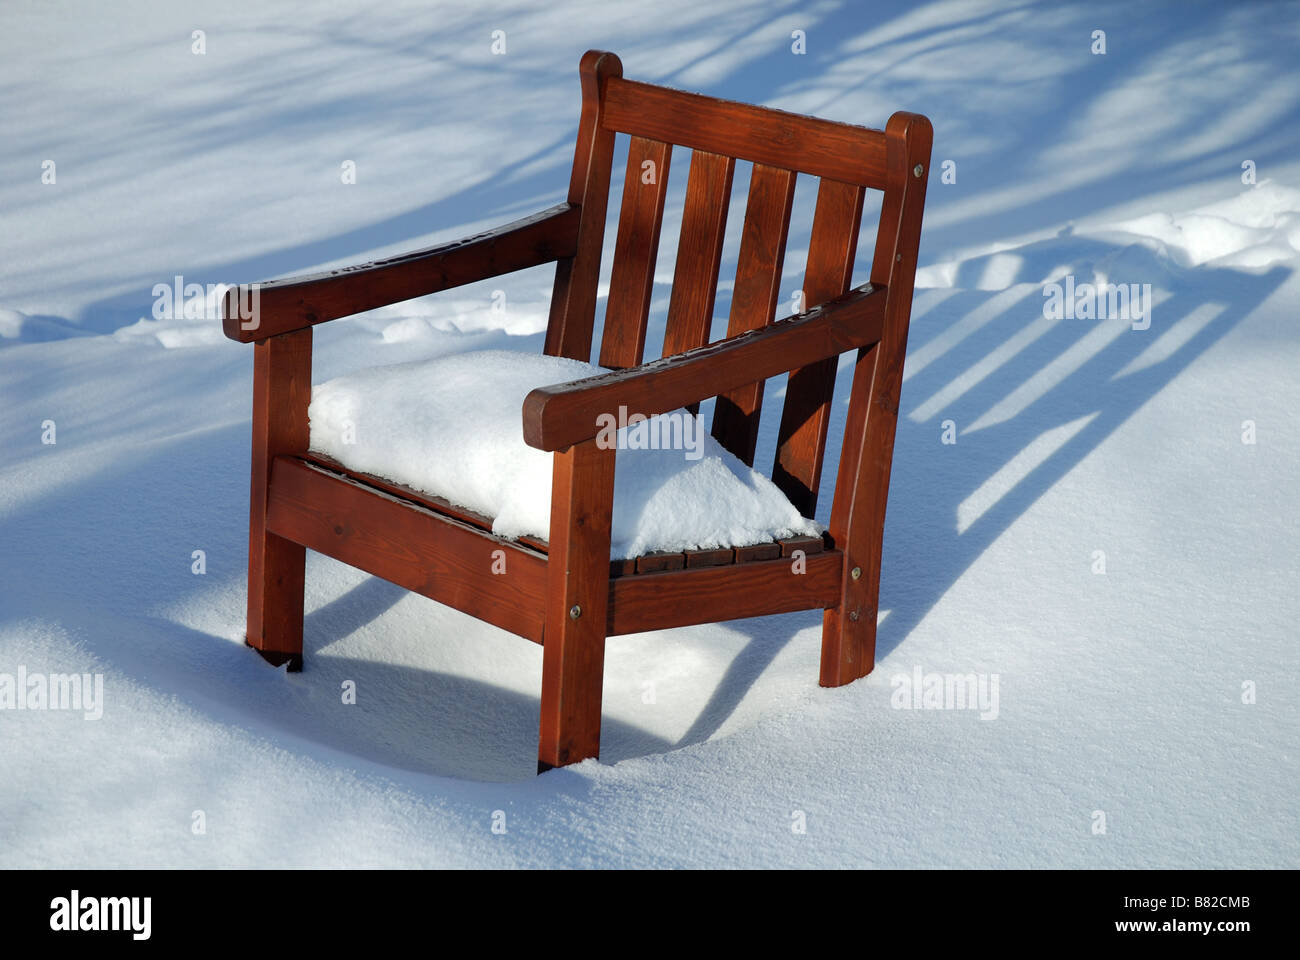 Garden chair covered in snow Stock Photo